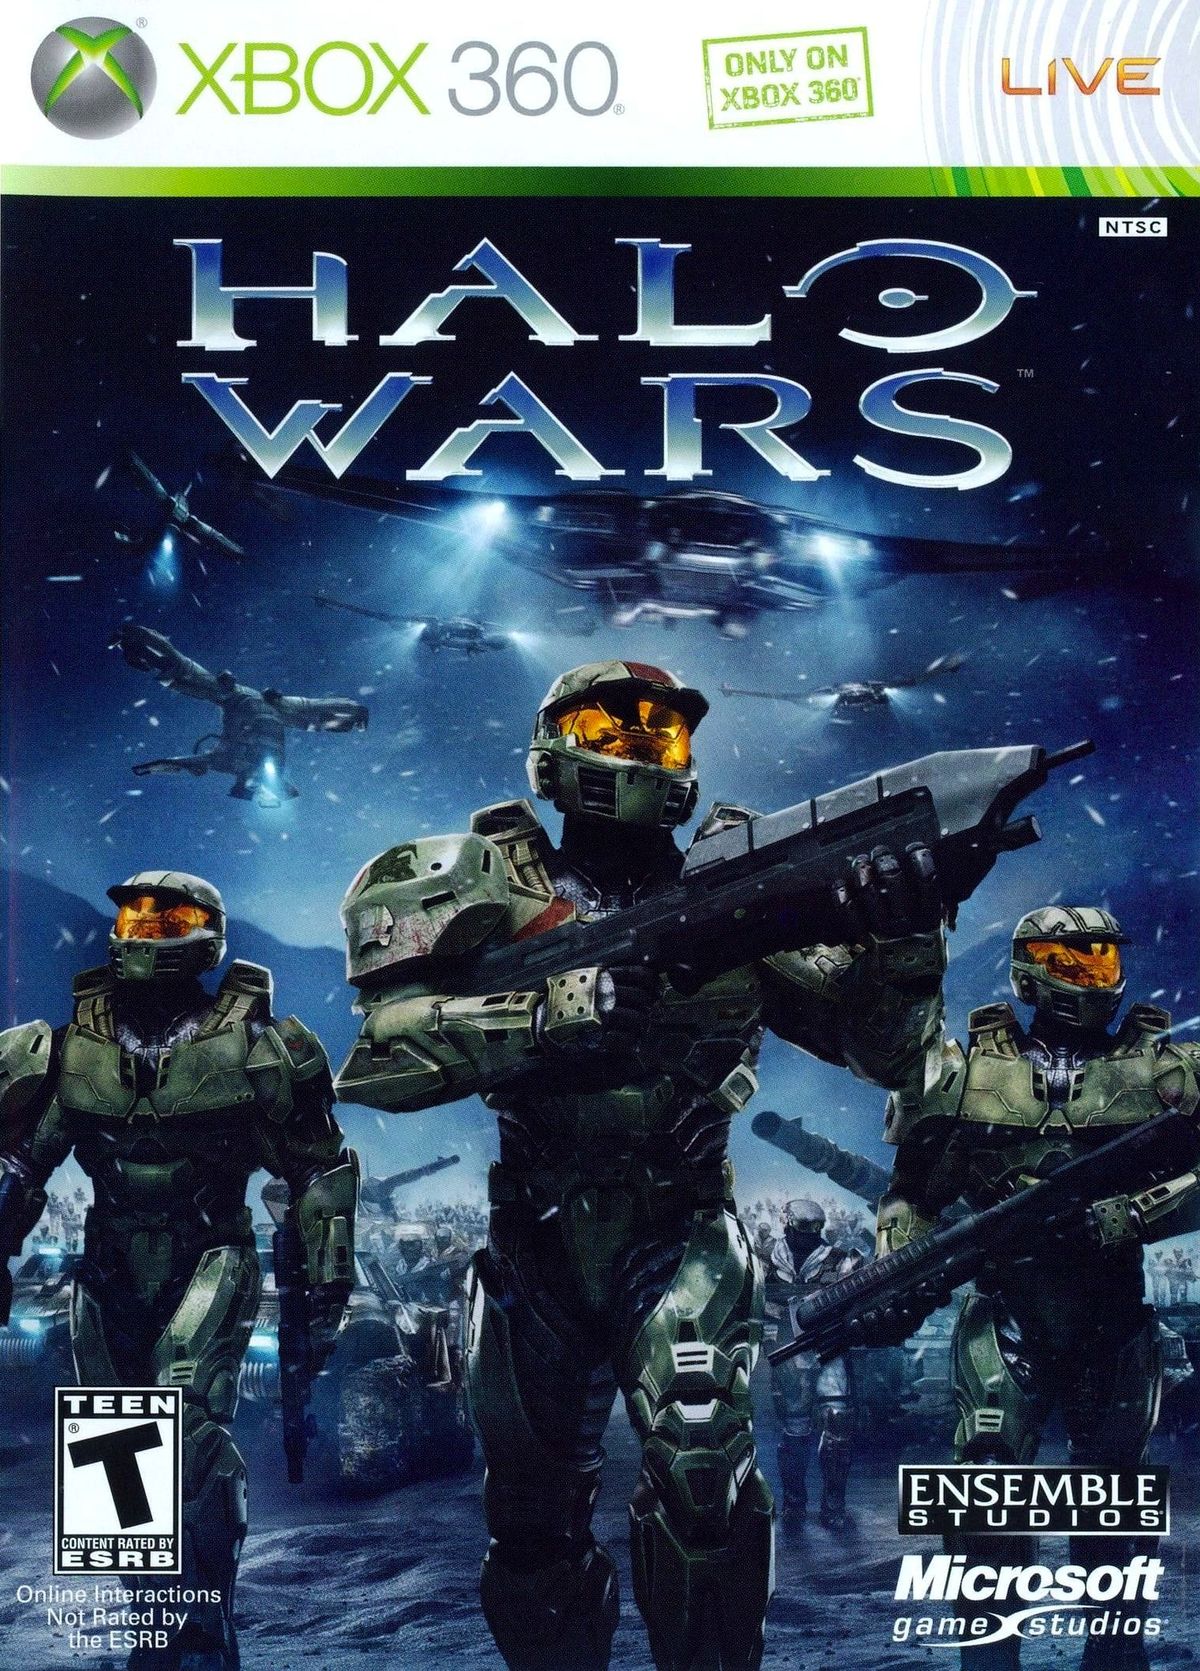 Co-Optimus - Review - Halo: The Master Chief Collection Co-Op Review